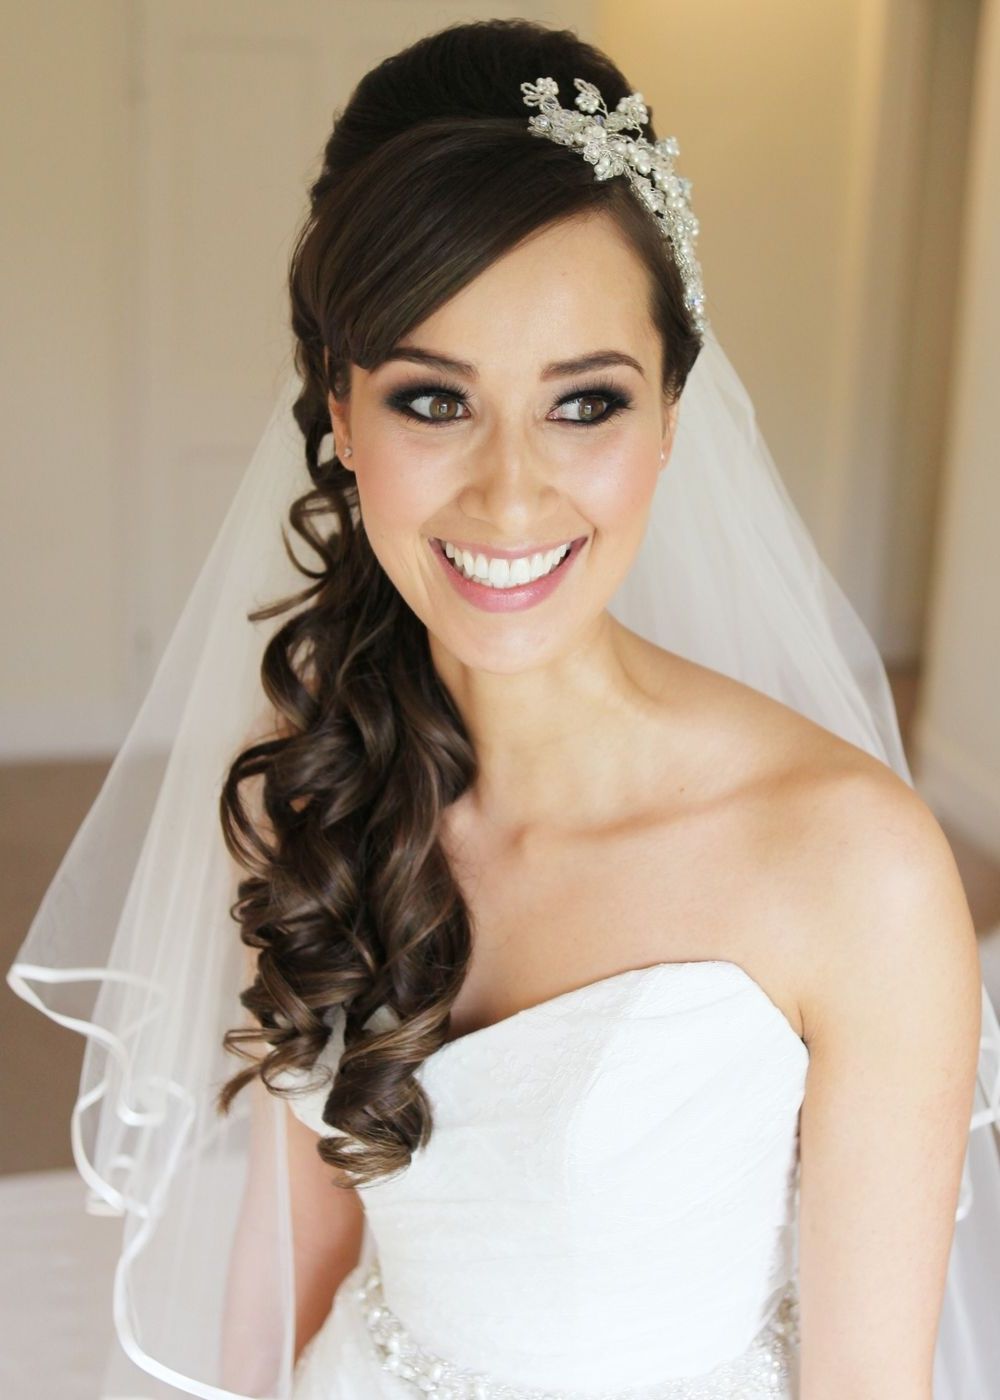 15 Fabulous Half Up Half Down Wedding Hairstyles (View 1 of 15)